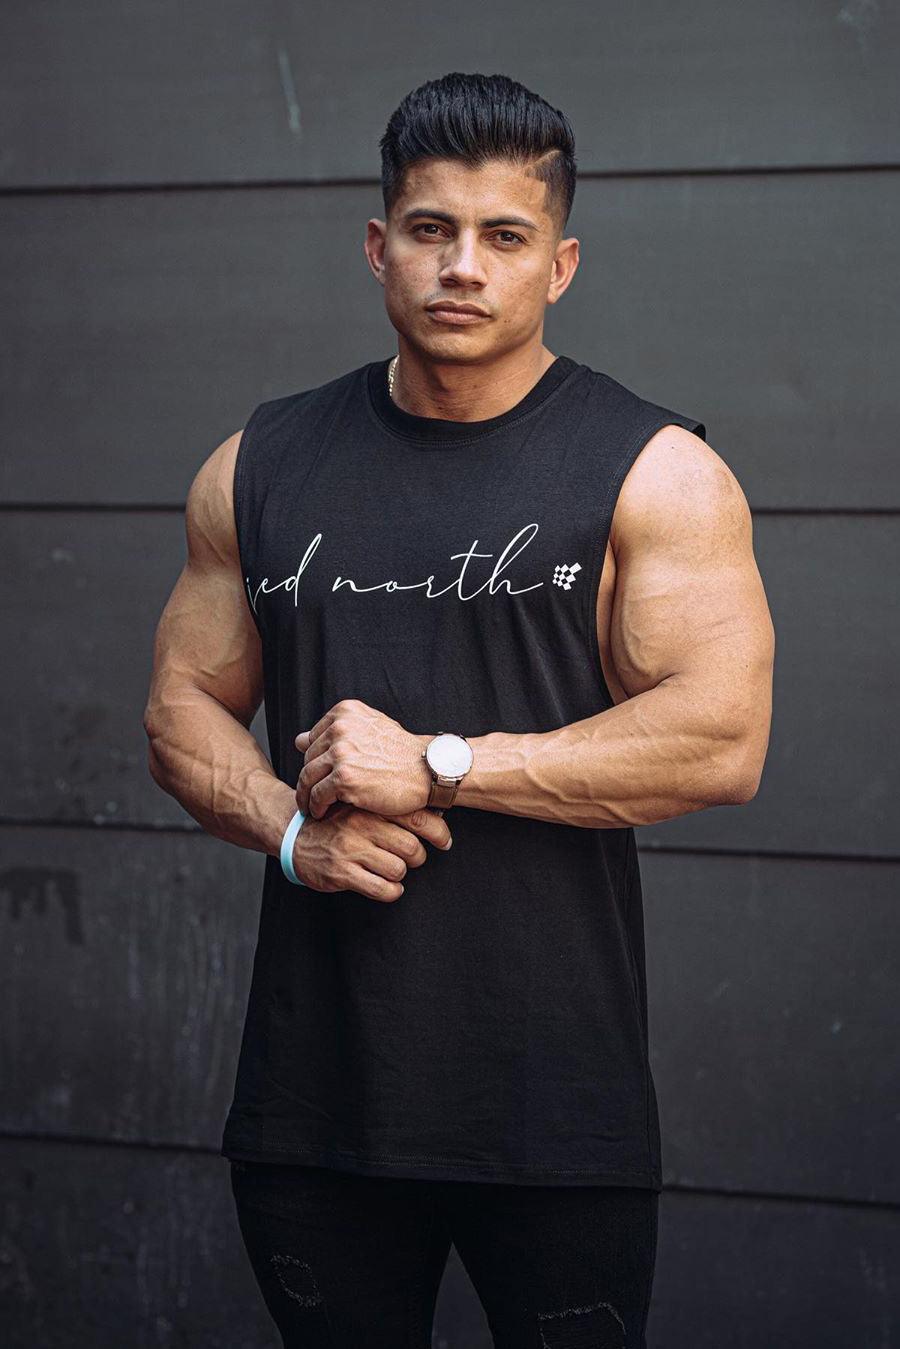 Workout Muscle Tee - Jed North Script - Jed North